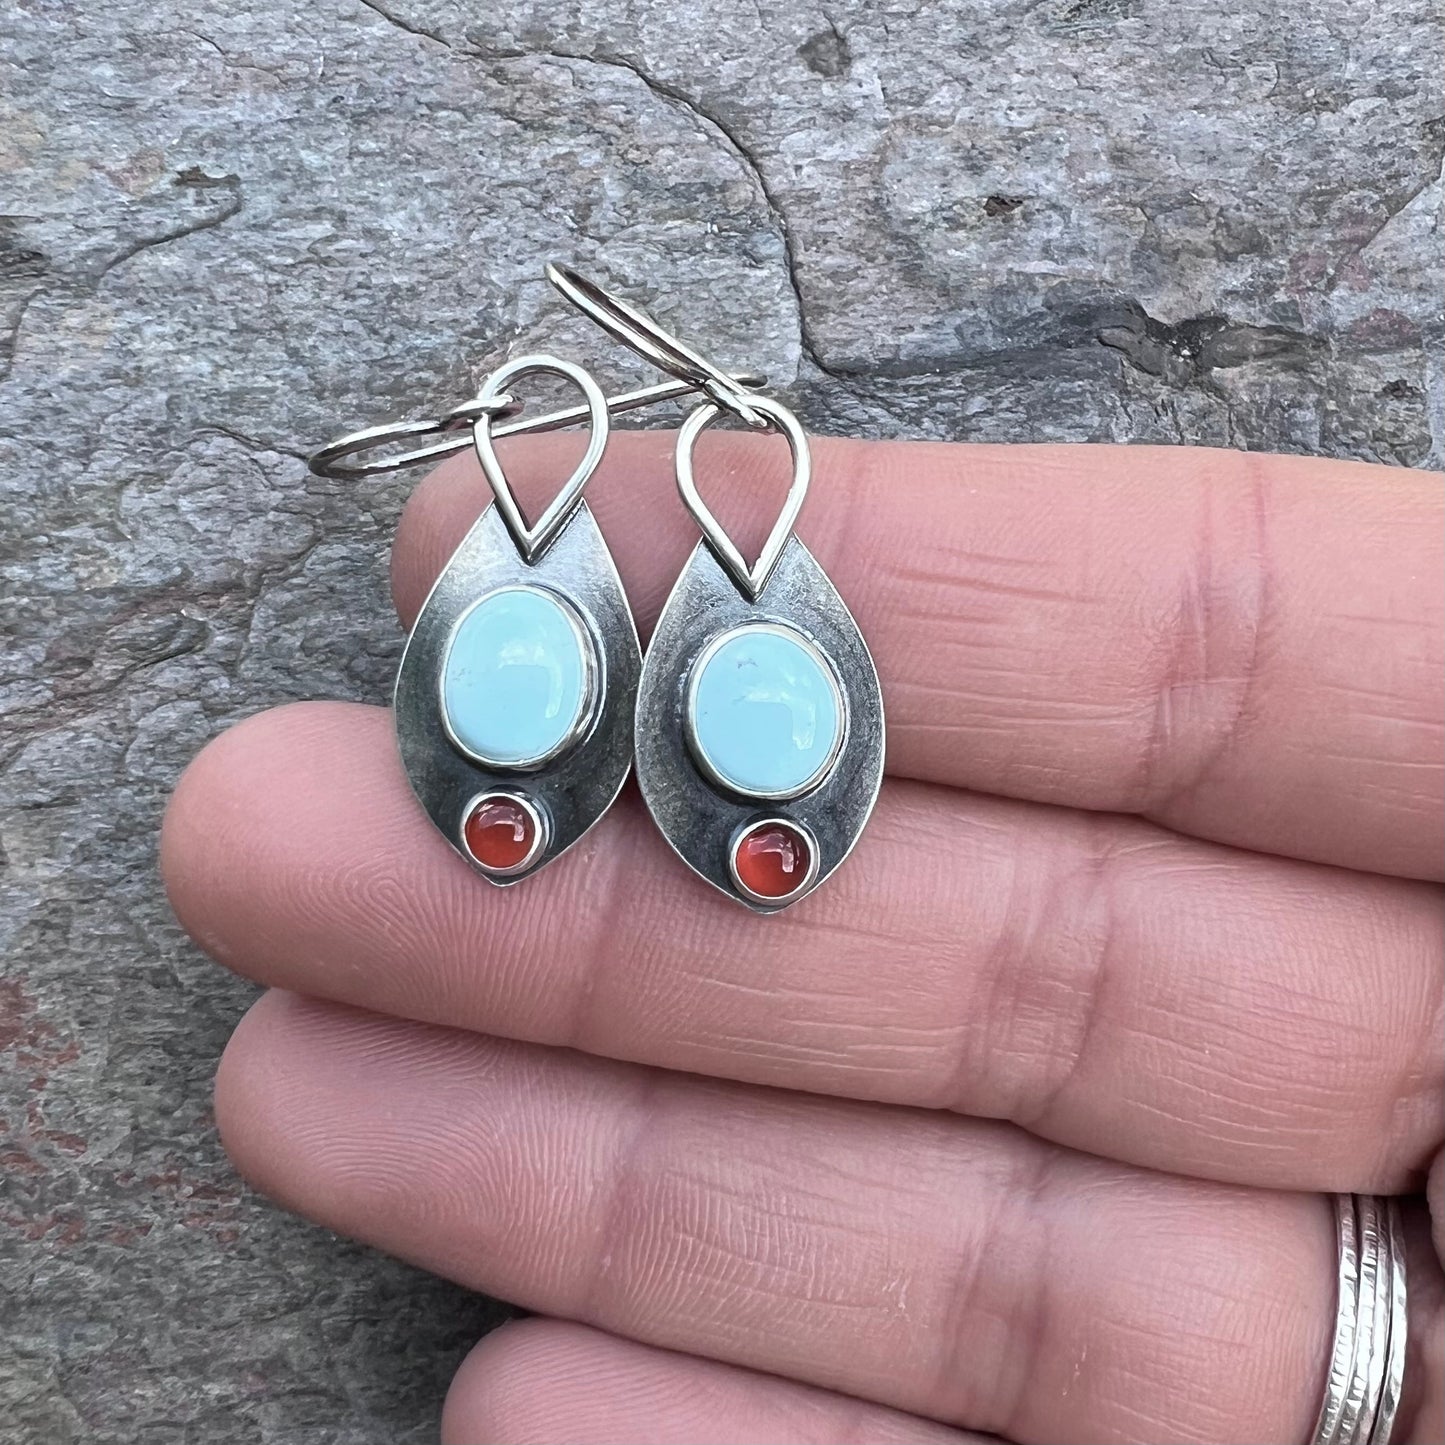 SOLD Turquoise and Carnelian Sterling Silver Earrings - Handmade One-of-a-kind Earrings